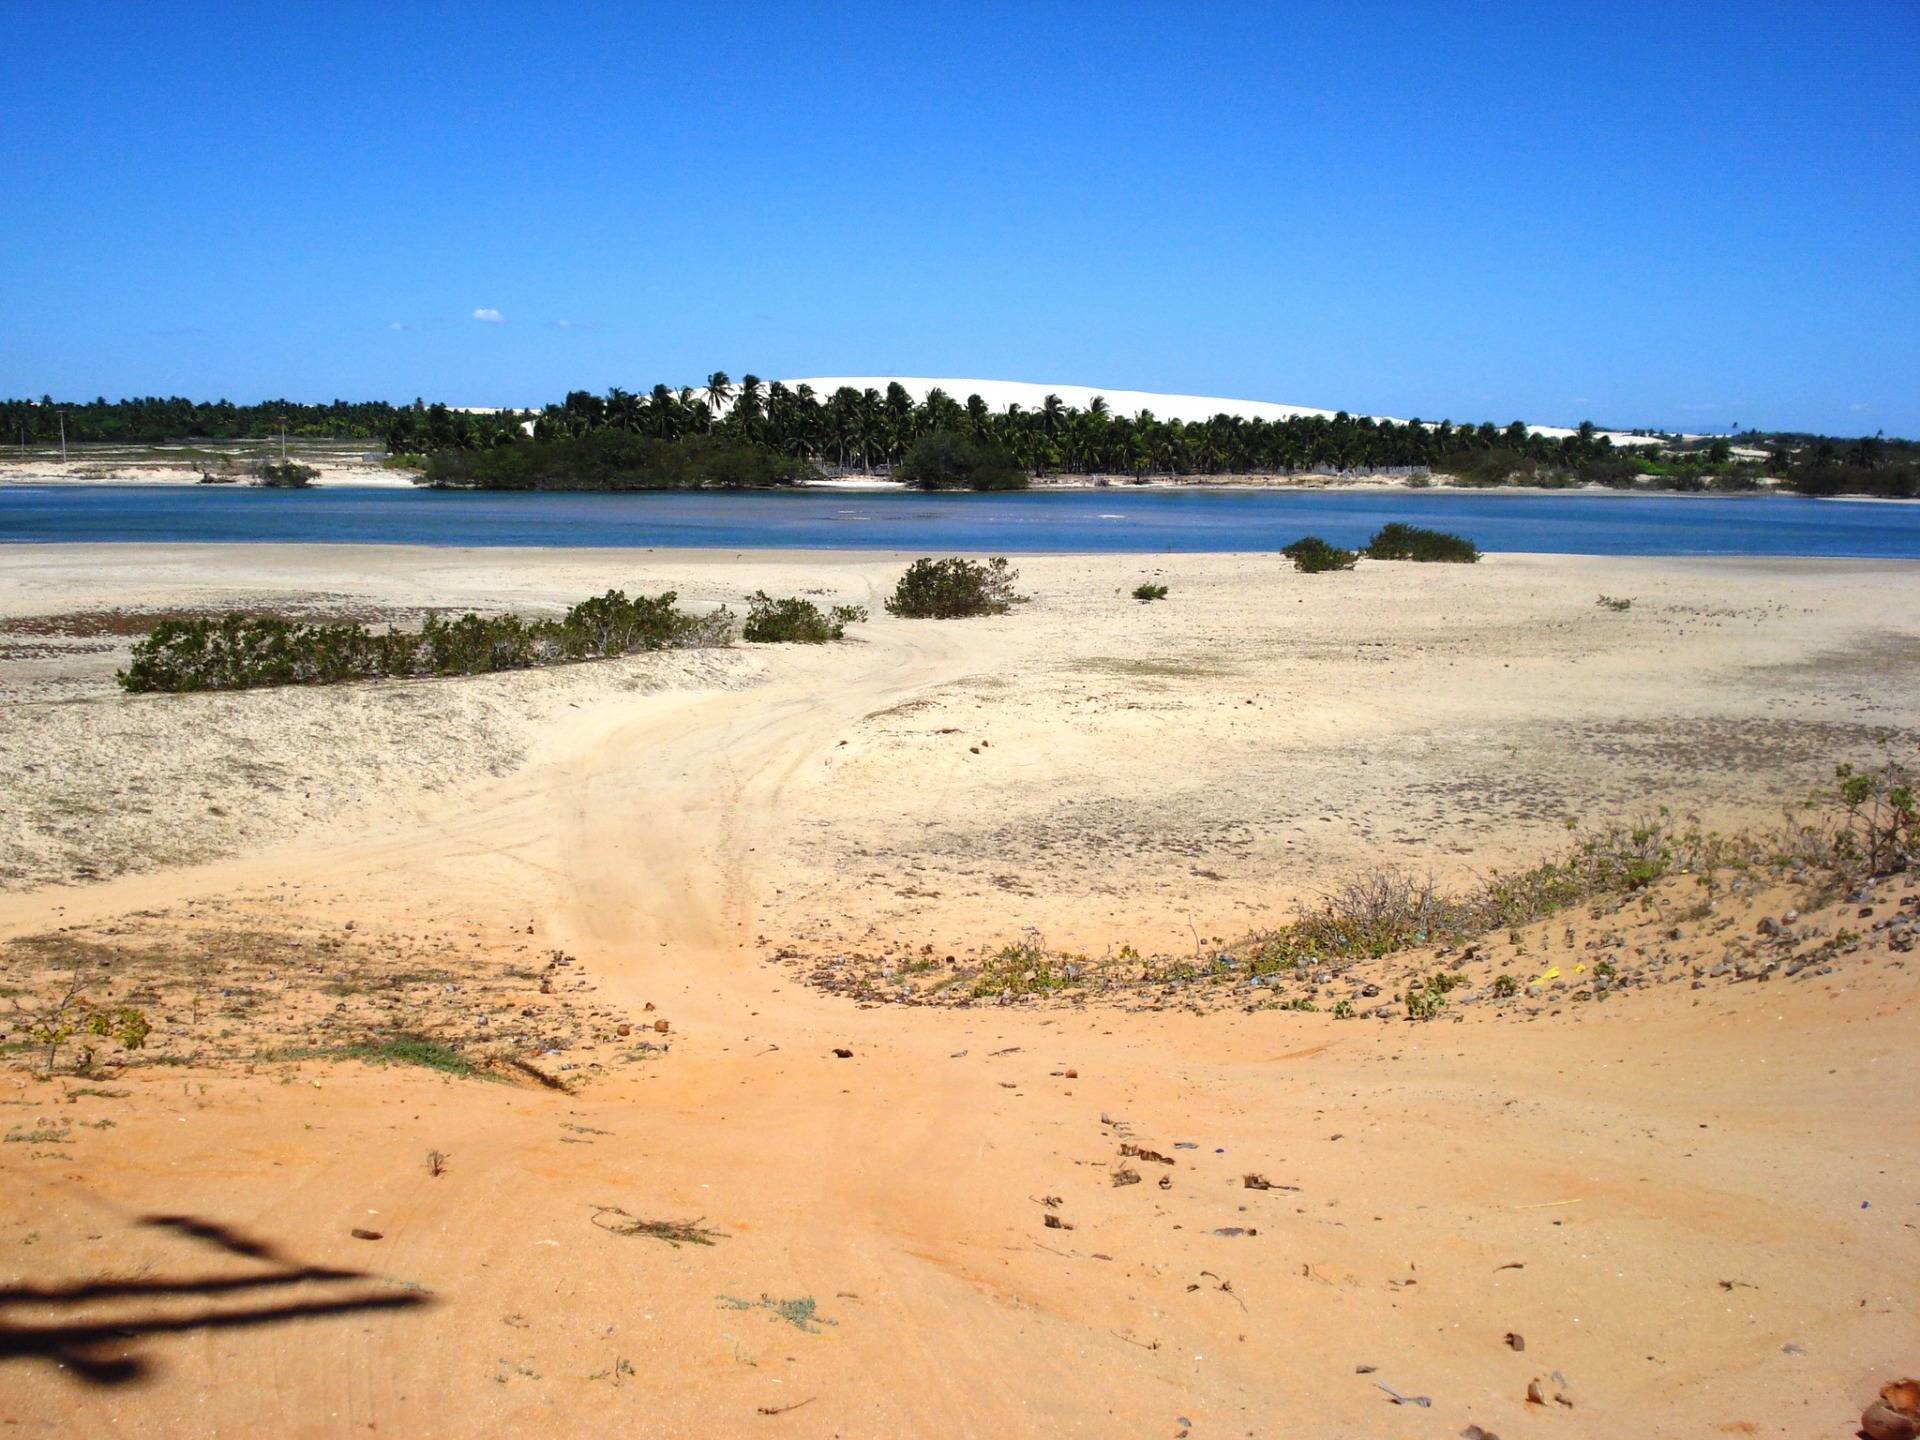 The site of the town of Tatajuba that was displaced by the dune